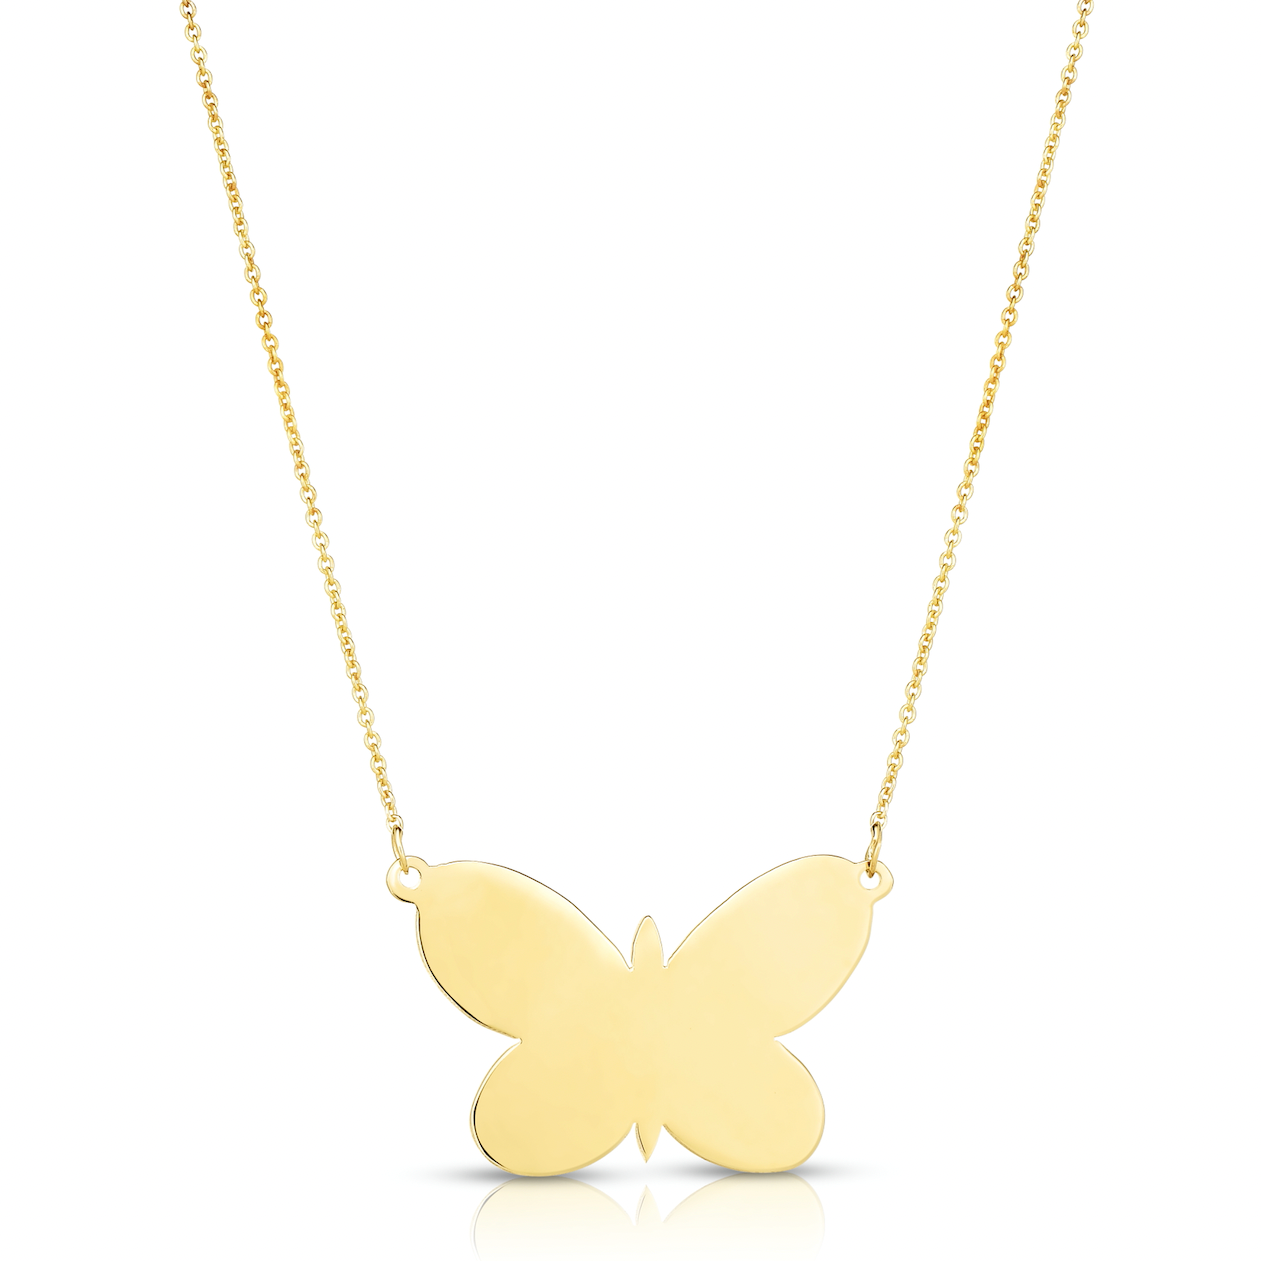 AMIKA - The Large Butterfly Necklace